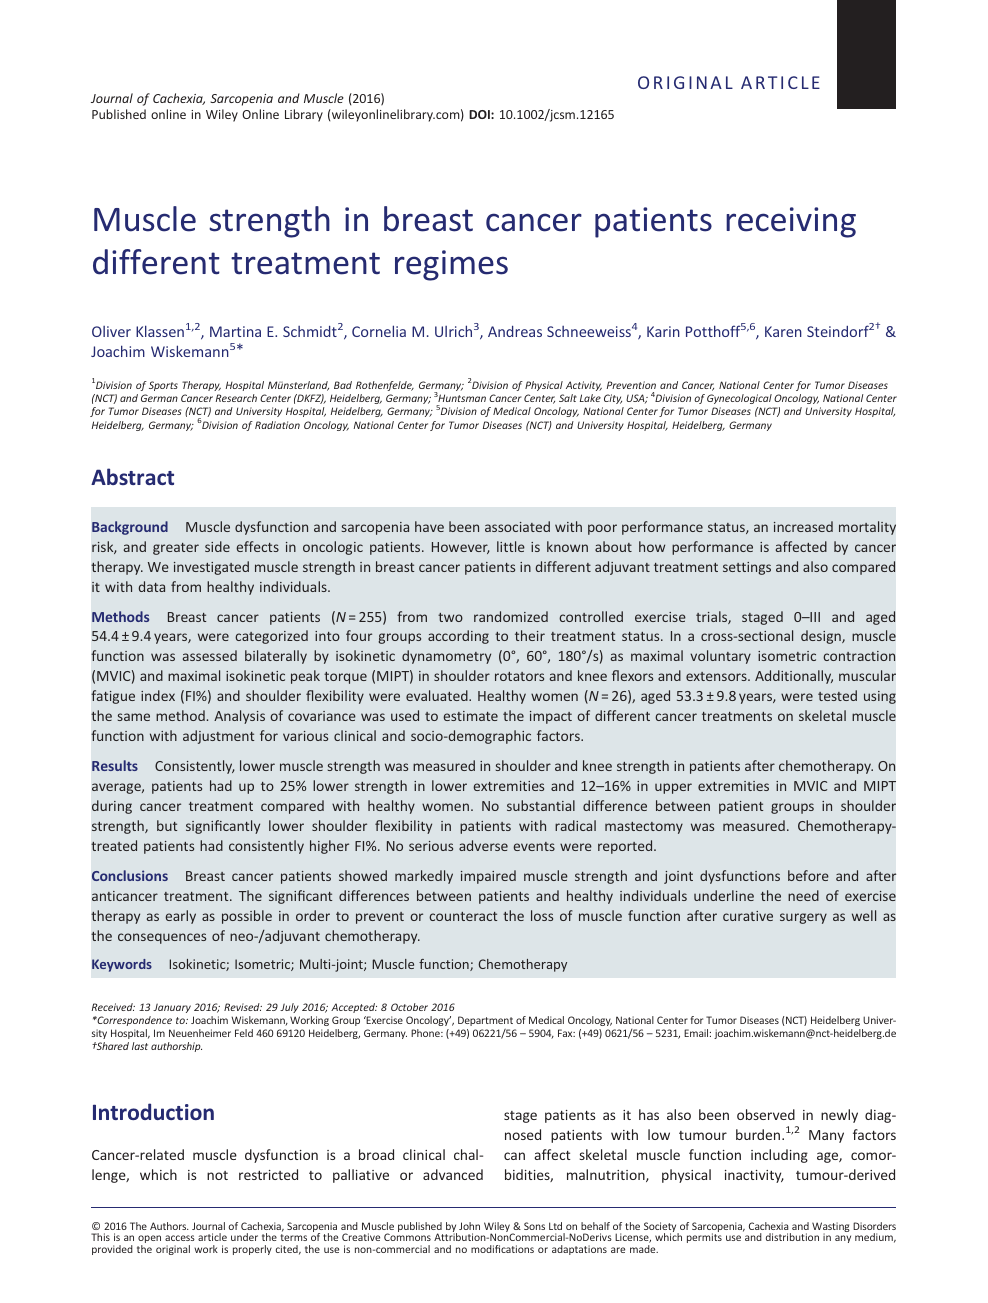 Muscle Strength In Breast Cancer Patients Receiving Different Treatment Regimes Topic Of Research Paper In Clinical Medicine Download Scholarly Article Pdf And Read For Free On Cyberleninka Open Science Hub